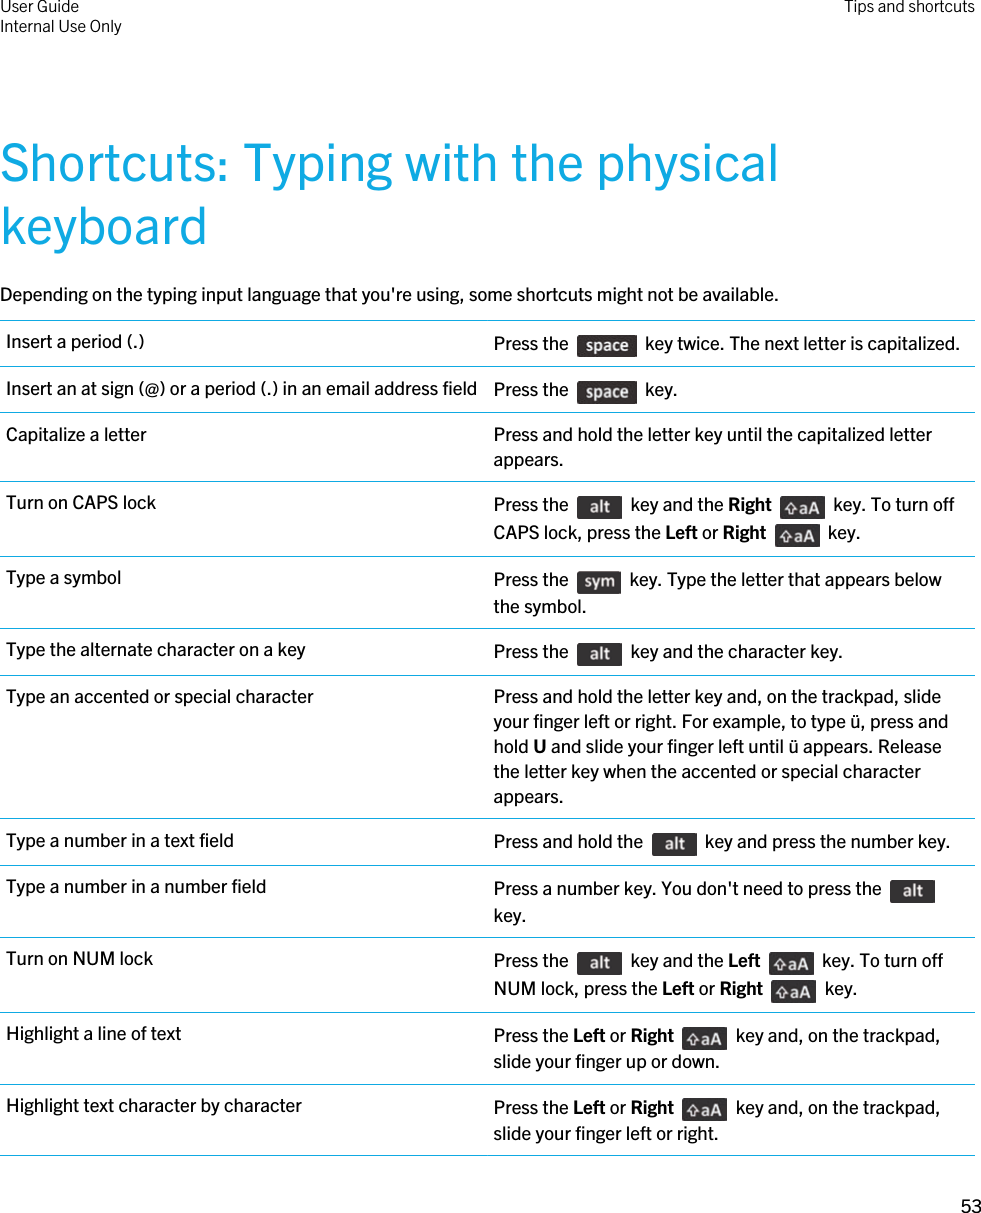 Shortcuts: Typing with the physical keyboardDepending on the typing input language that you&apos;re using, some shortcuts might not be available.Insert a period (.) Press the    key twice. The next letter is capitalized.Insert an at sign (@) or a period (.) in an email address field Press the    key.Capitalize a letter Press and hold the letter key until the capitalized letter appears.Turn on CAPS lock Press the    key and the Right    key. To turn off CAPS lock, press the Left or Right    key.Type a symbol Press the    key. Type the letter that appears below the symbol.Type the alternate character on a key Press the    key and the character key.Type an accented or special character Press and hold the letter key and, on the trackpad, slide your finger left or right. For example, to type ü, press and hold U and slide your finger left until ü appears. Release the letter key when the accented or special character appears.Type a number in a text field Press and hold the    key and press the number key.Type a number in a number field Press a number key. You don&apos;t need to press the key.Turn on NUM lock Press the    key and the Left    key. To turn off NUM lock, press the Left or Right    key.Highlight a line of text Press the Left or Right    key and, on the trackpad, slide your finger up or down.Highlight text character by character Press the Left or Right    key and, on the trackpad, slide your finger left or right.User GuideInternal Use Only Tips and shortcuts53 